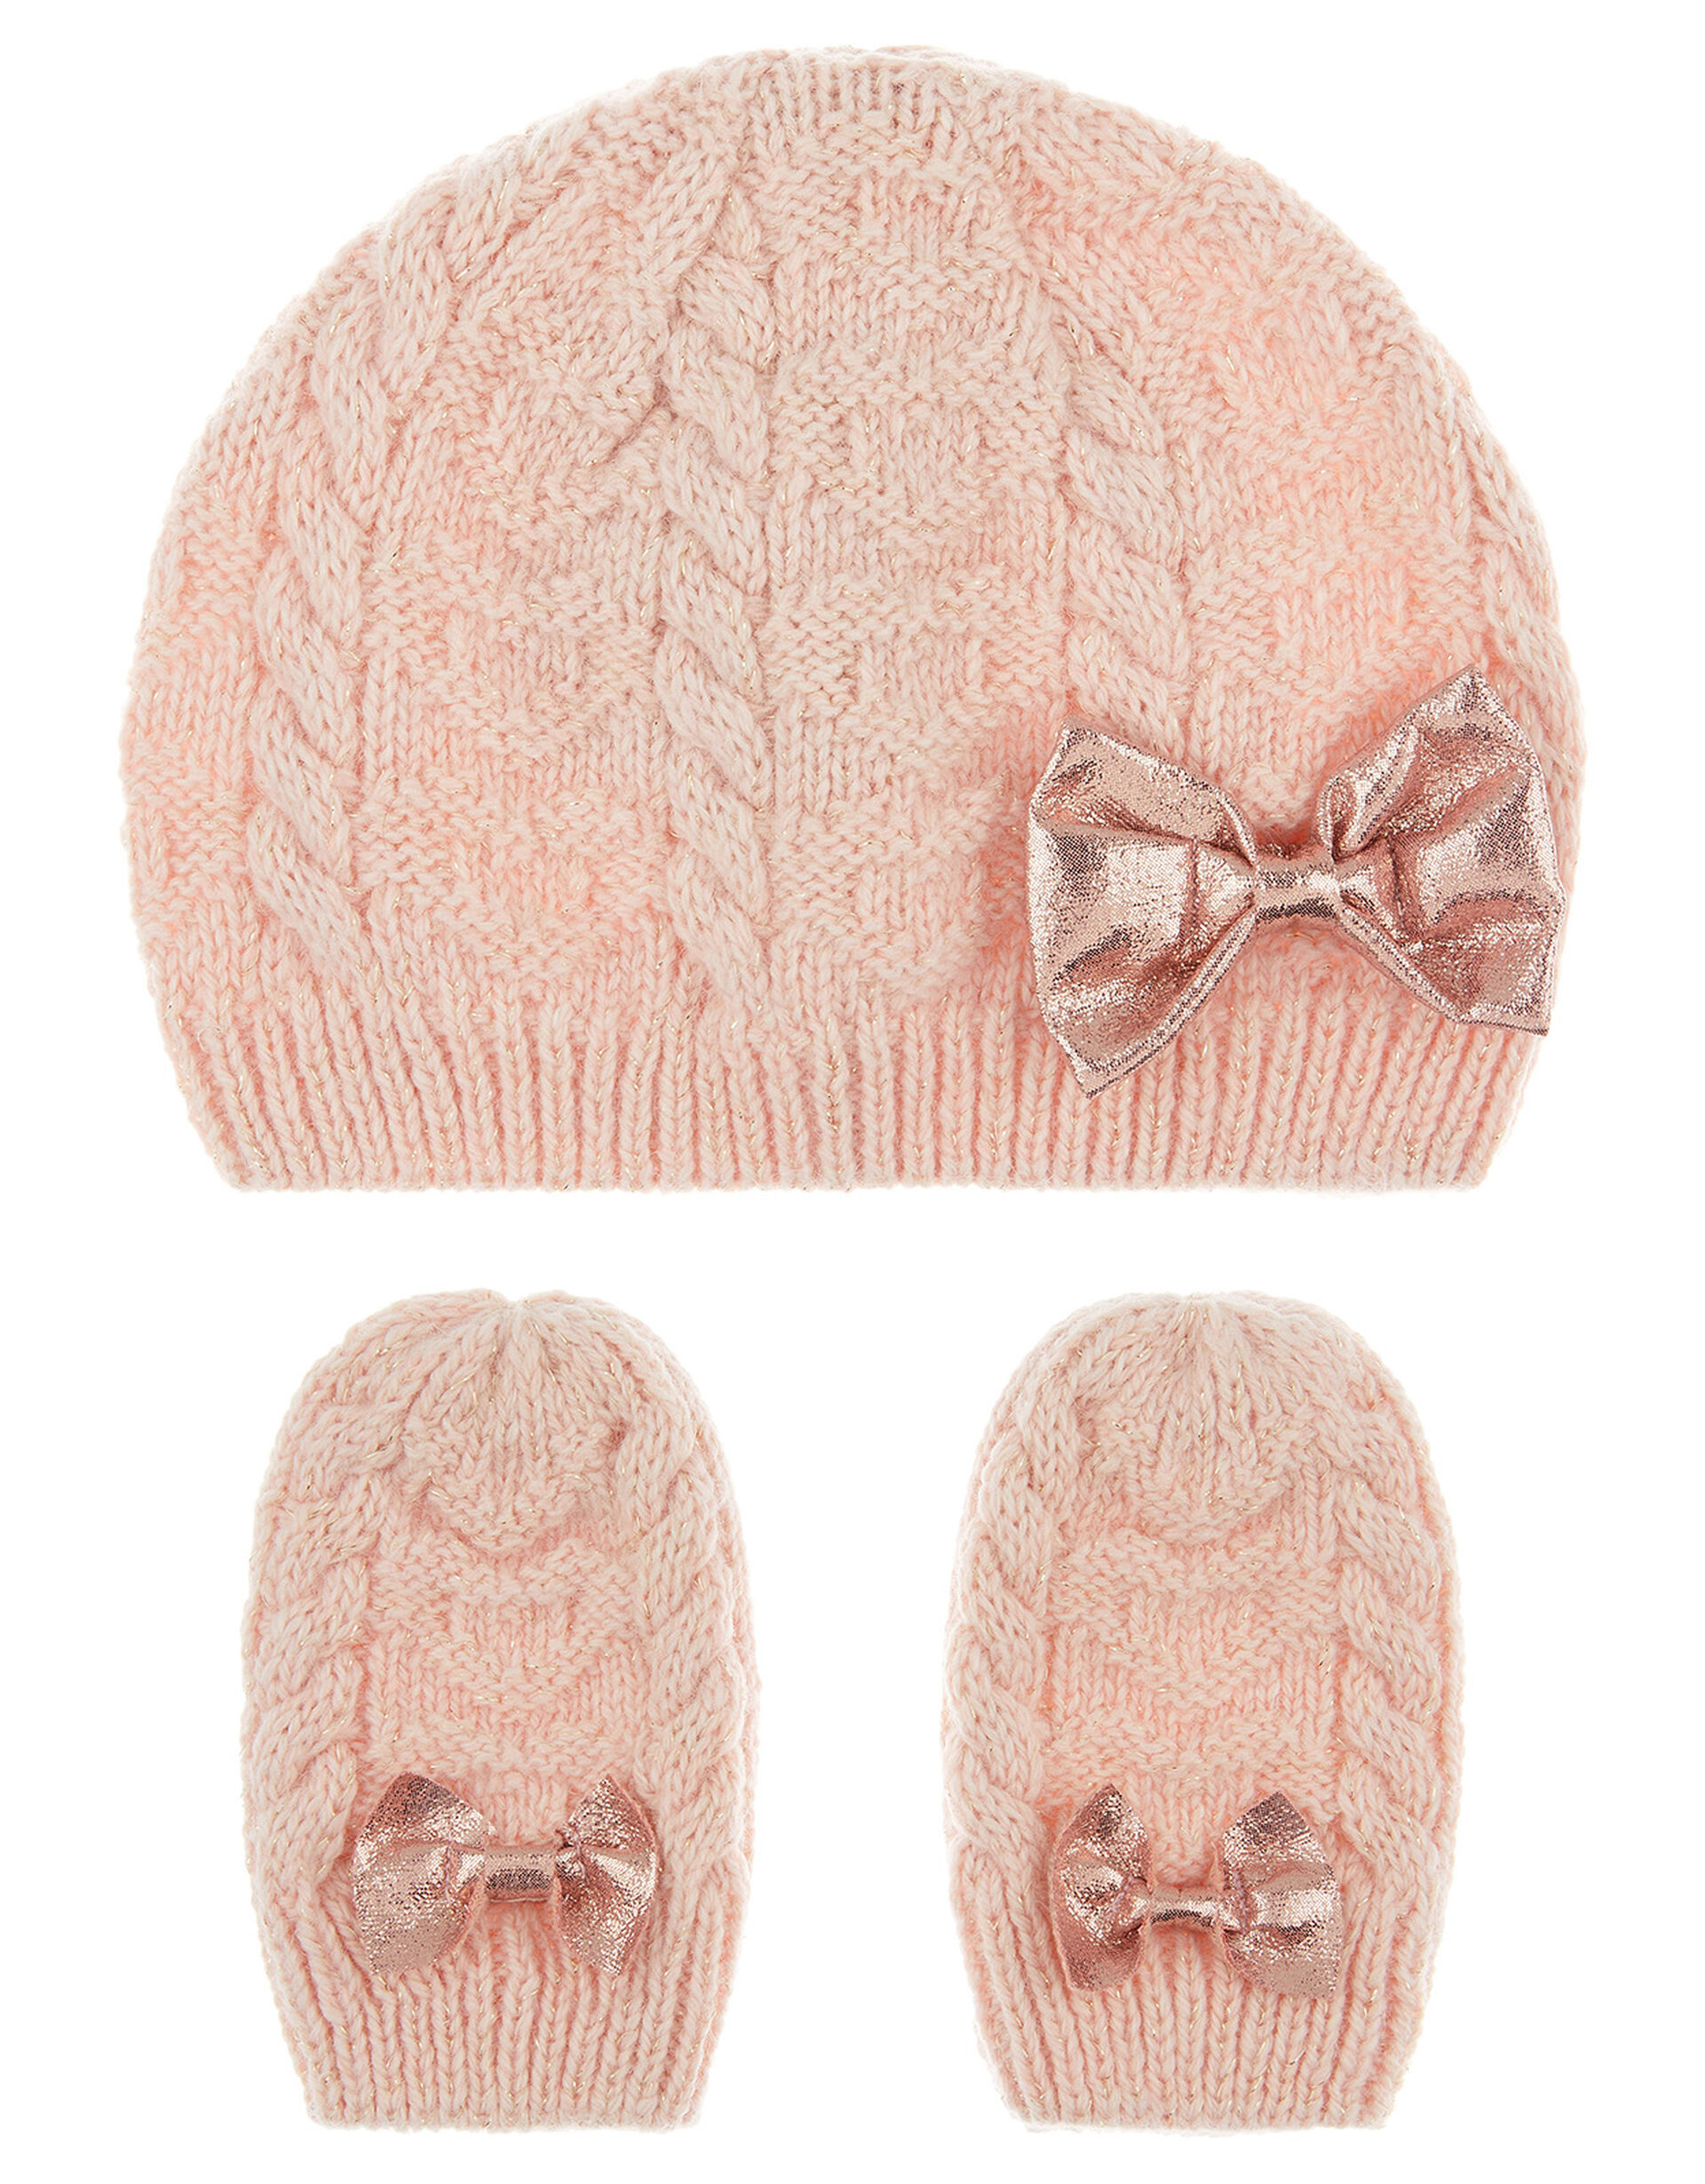 Baby Poppy Beanie and Mittens Set, Pink (PINK), large